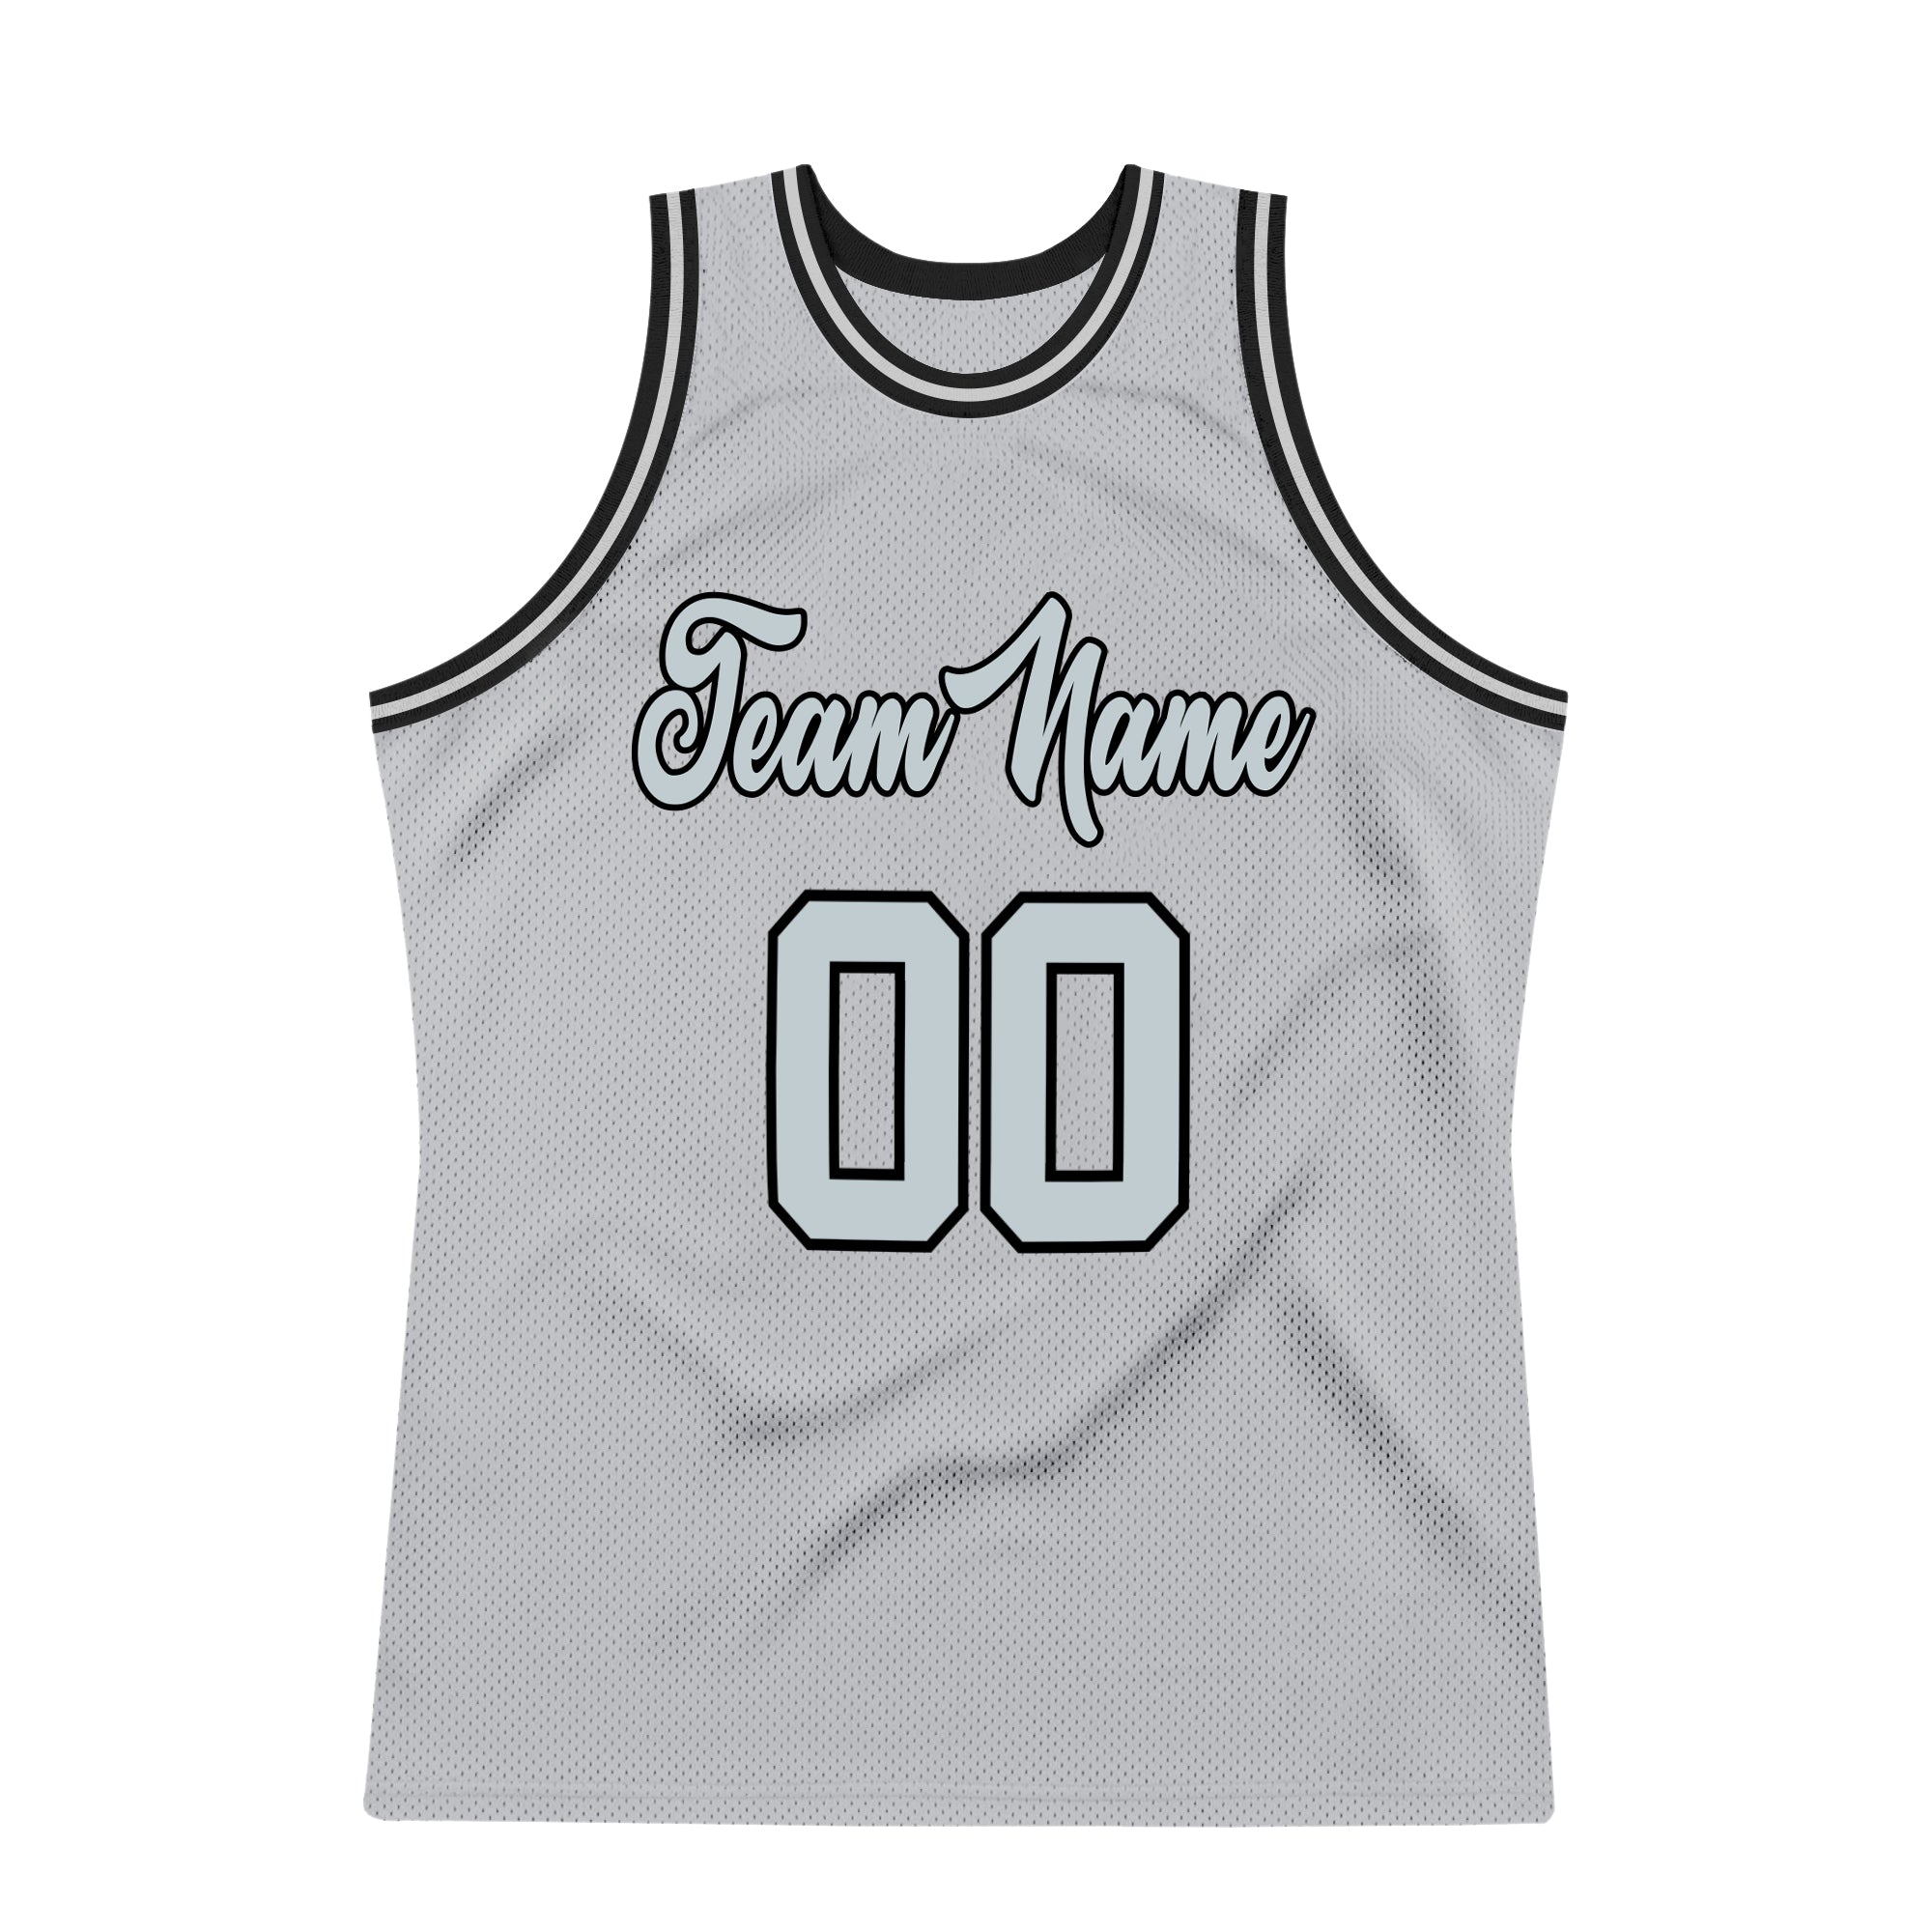 Your Team The Rim Tournament Shoot Out 2 Stitched Mesh Basketball Jersey Shirt, Men's, Size: 2XL, Gray